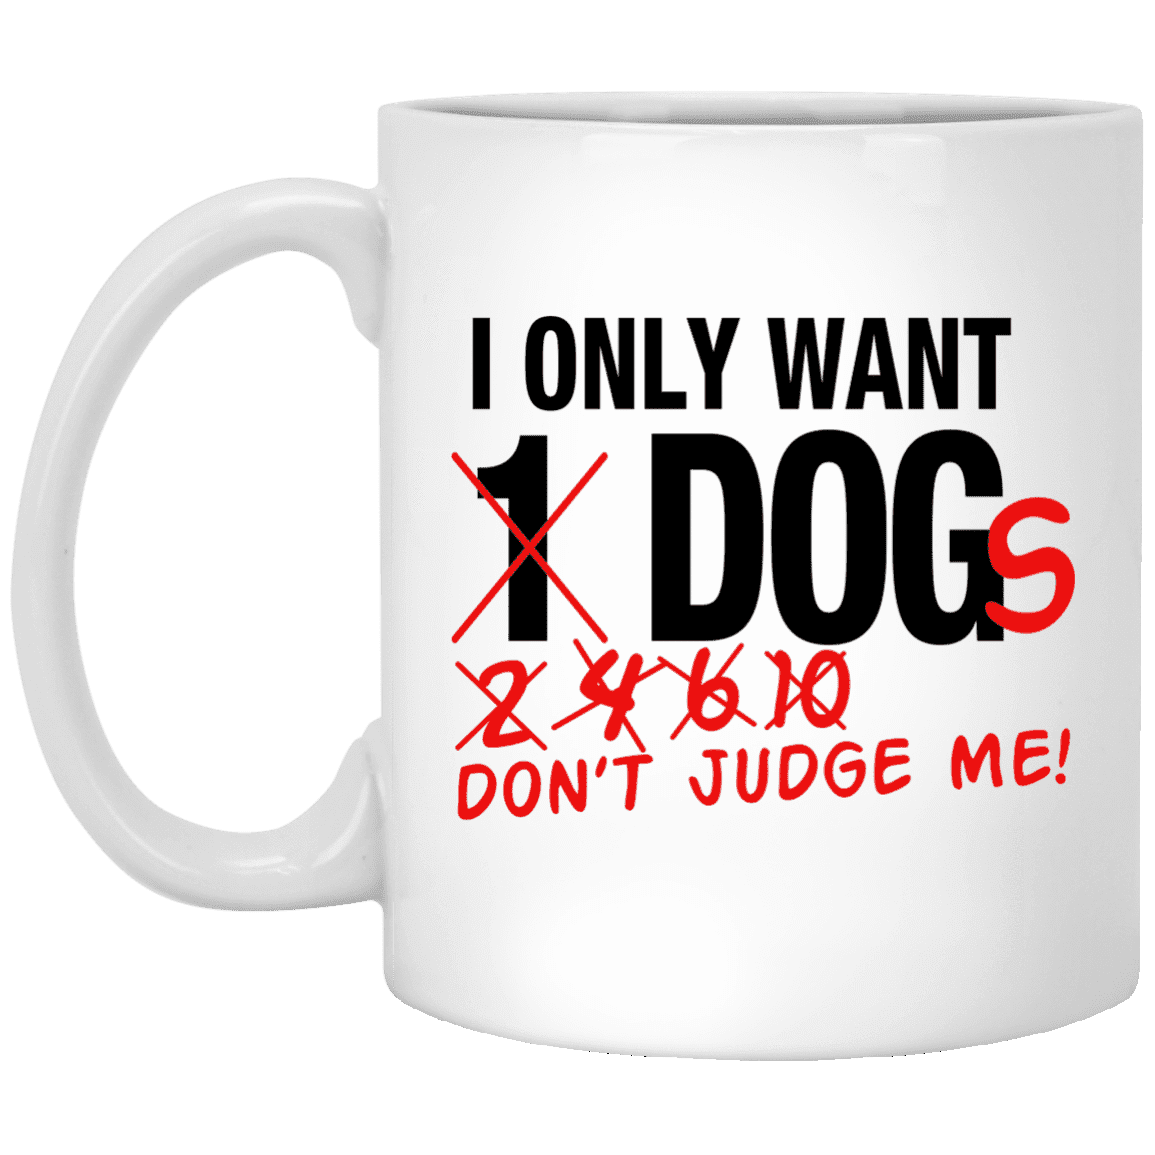 I Only Want Dogs - Mugs.